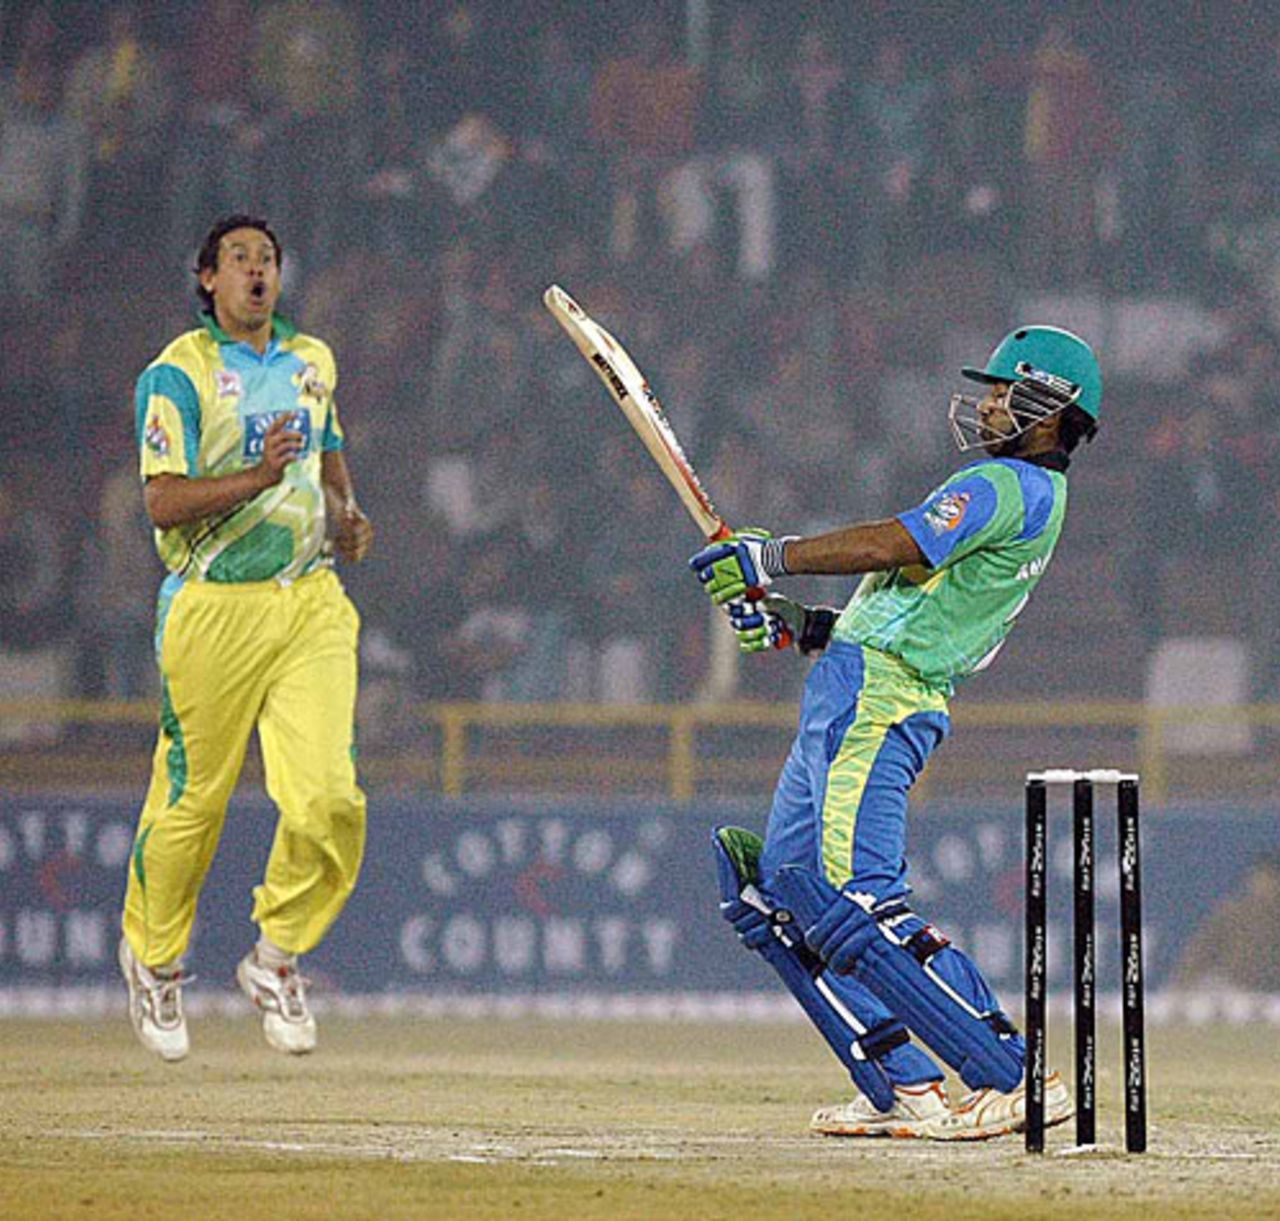 Anirudh Singh moves away to avoid a short one from Daryl Tuffey, Chandigarh Lions v Hyderabad Heroes, 7th match, Indian Cricket League, Panchkula, December 5, 2007